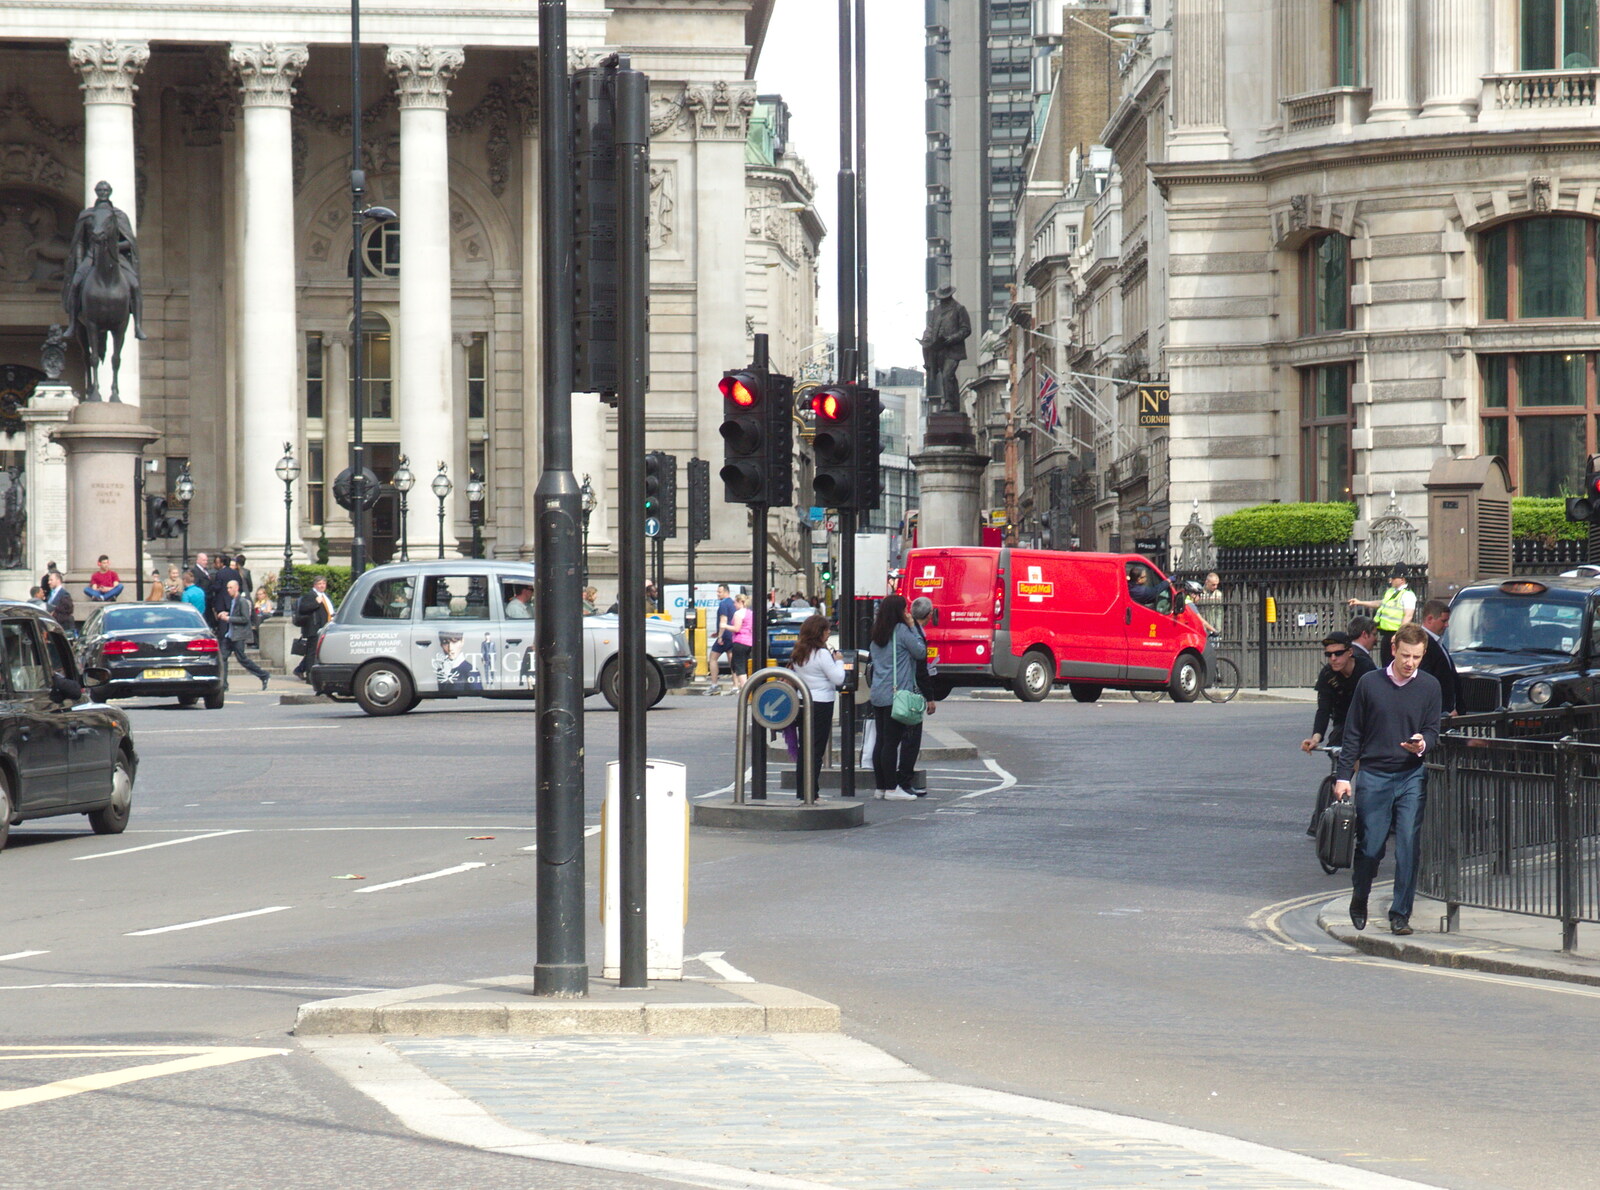 Bank junction from A May Miscellany, London - 8th May 2014